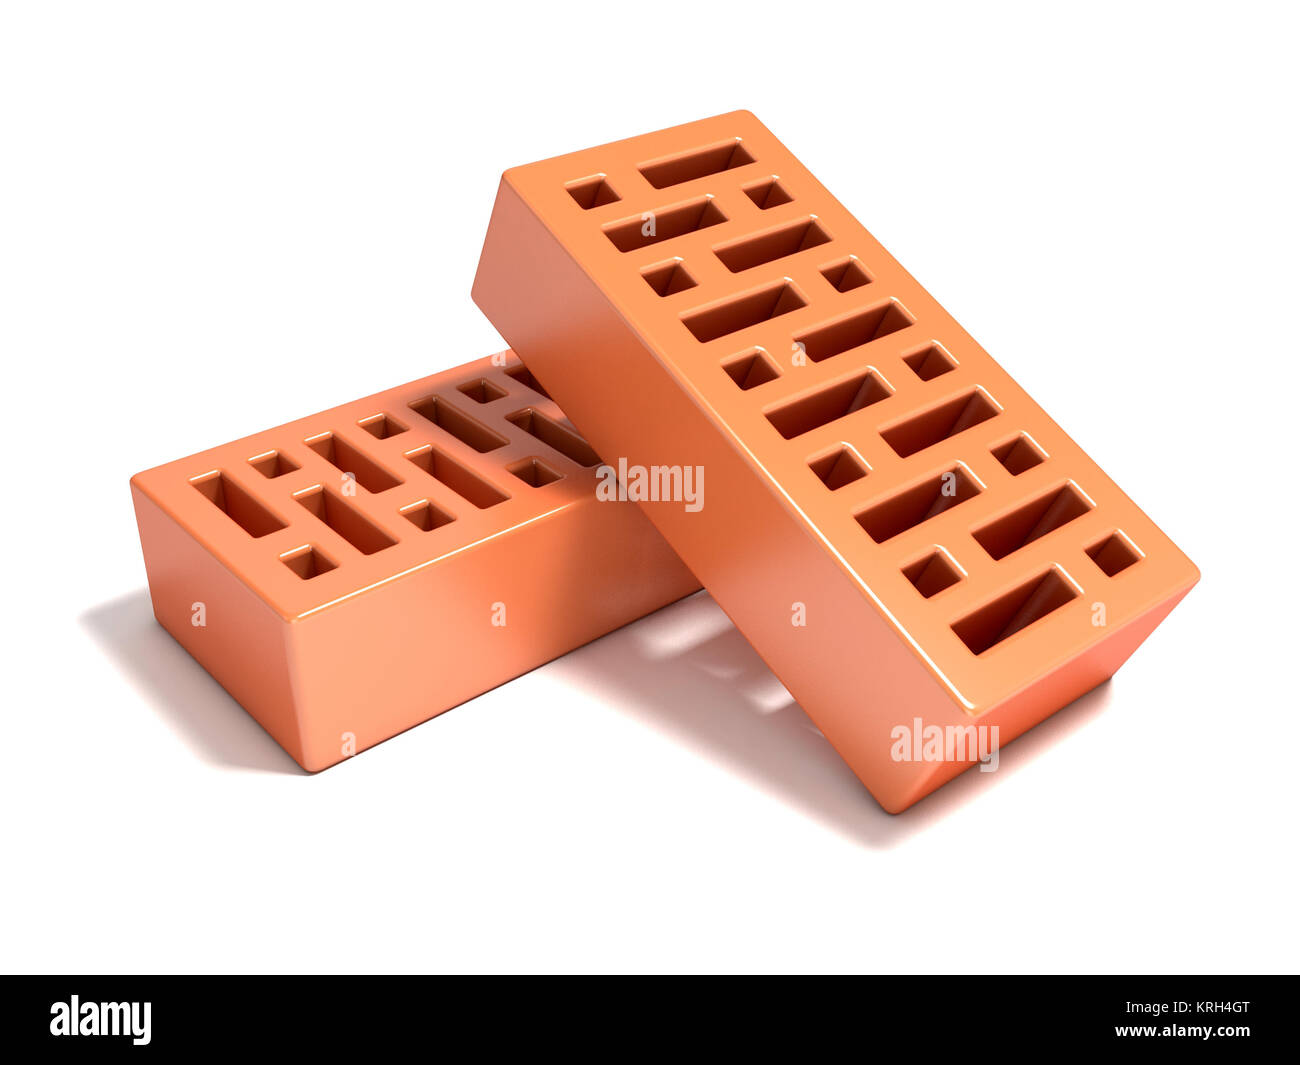 Bricks with holes Cut Out Stock Images & Pictures - Alamy